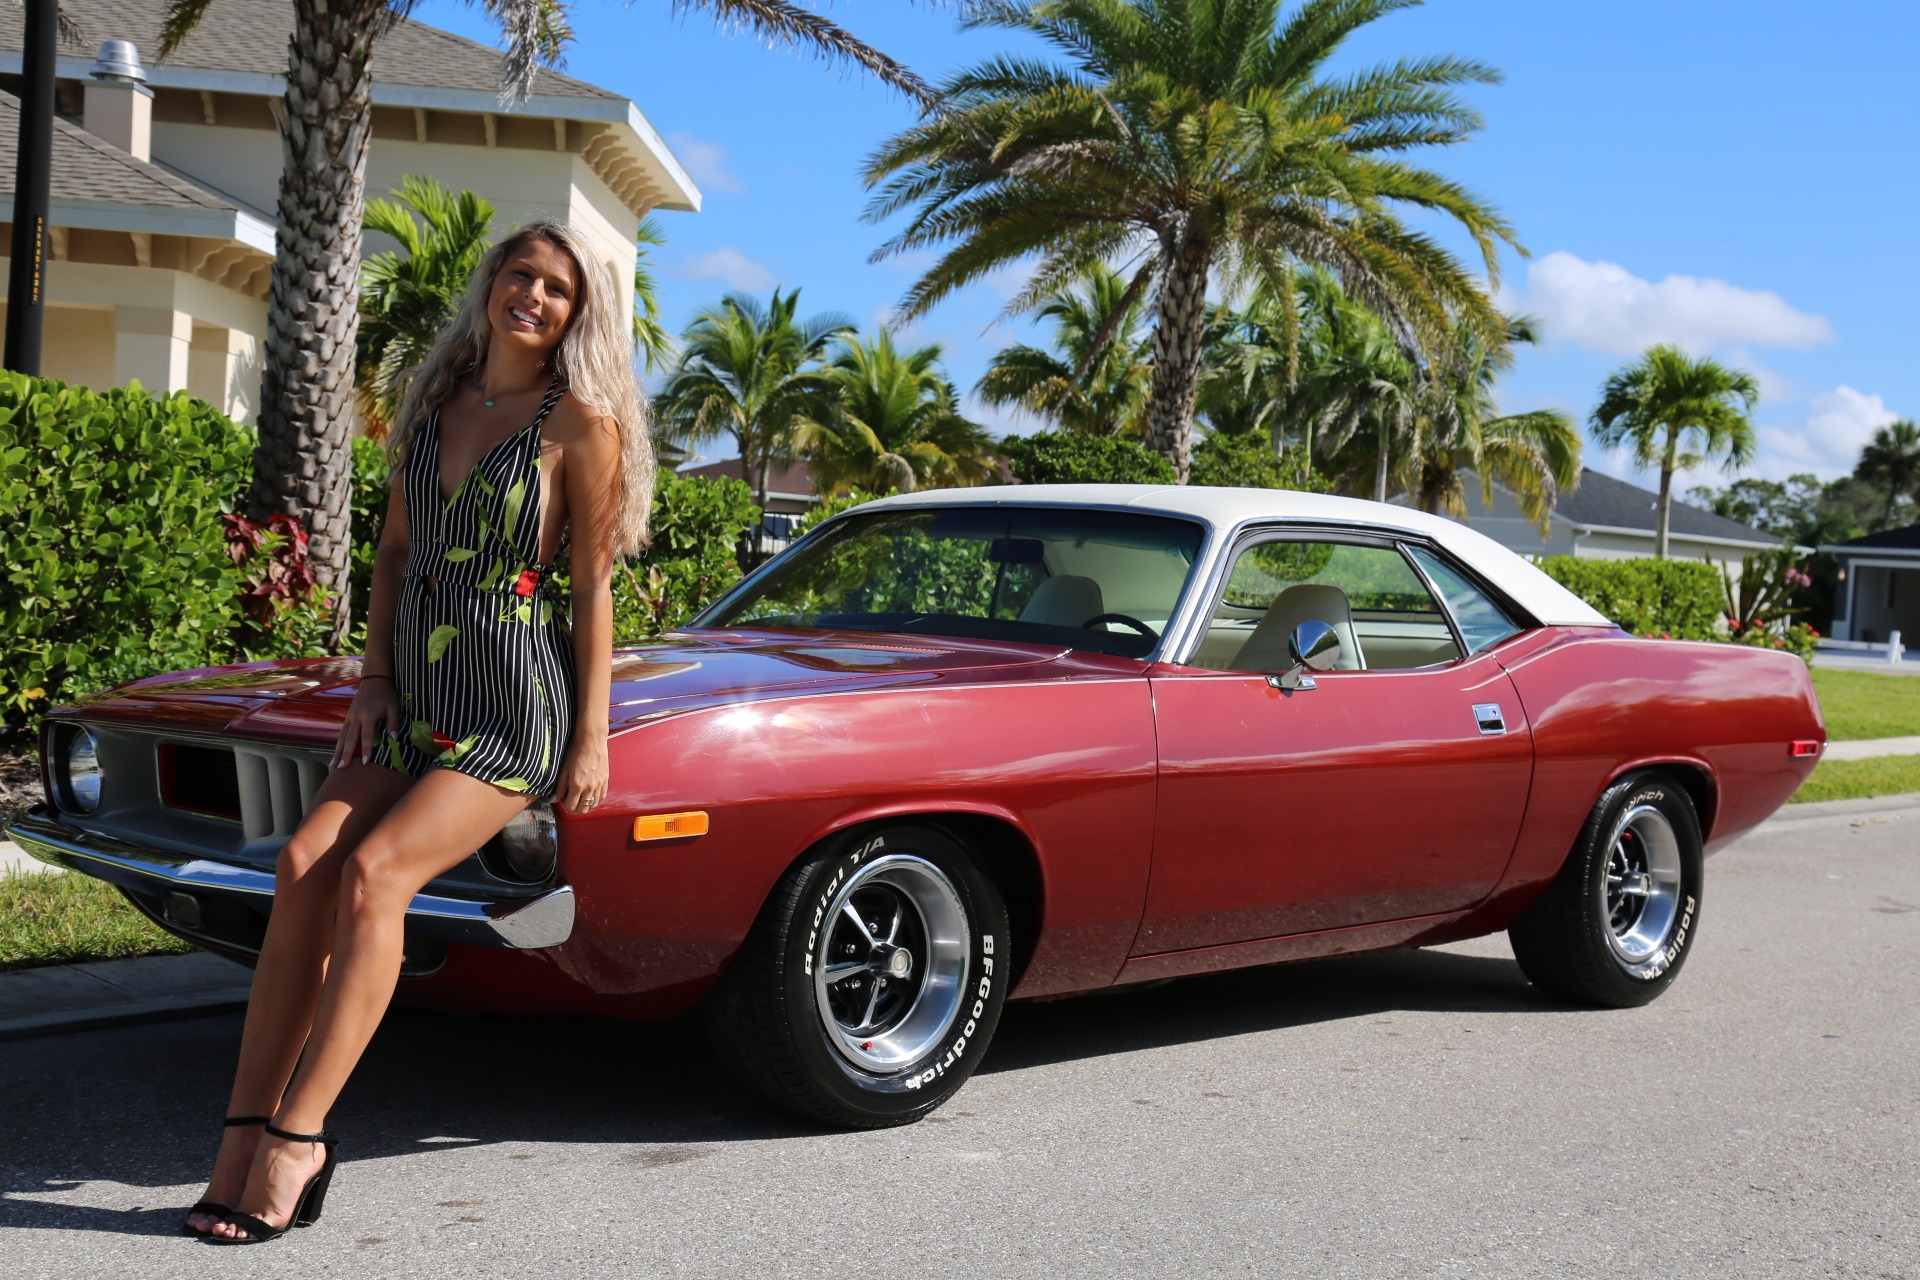 Used 1974 Plymouth Barracuda for sale Sold at Muscle Cars for Sale Inc. in Fort Myers FL 33912 3